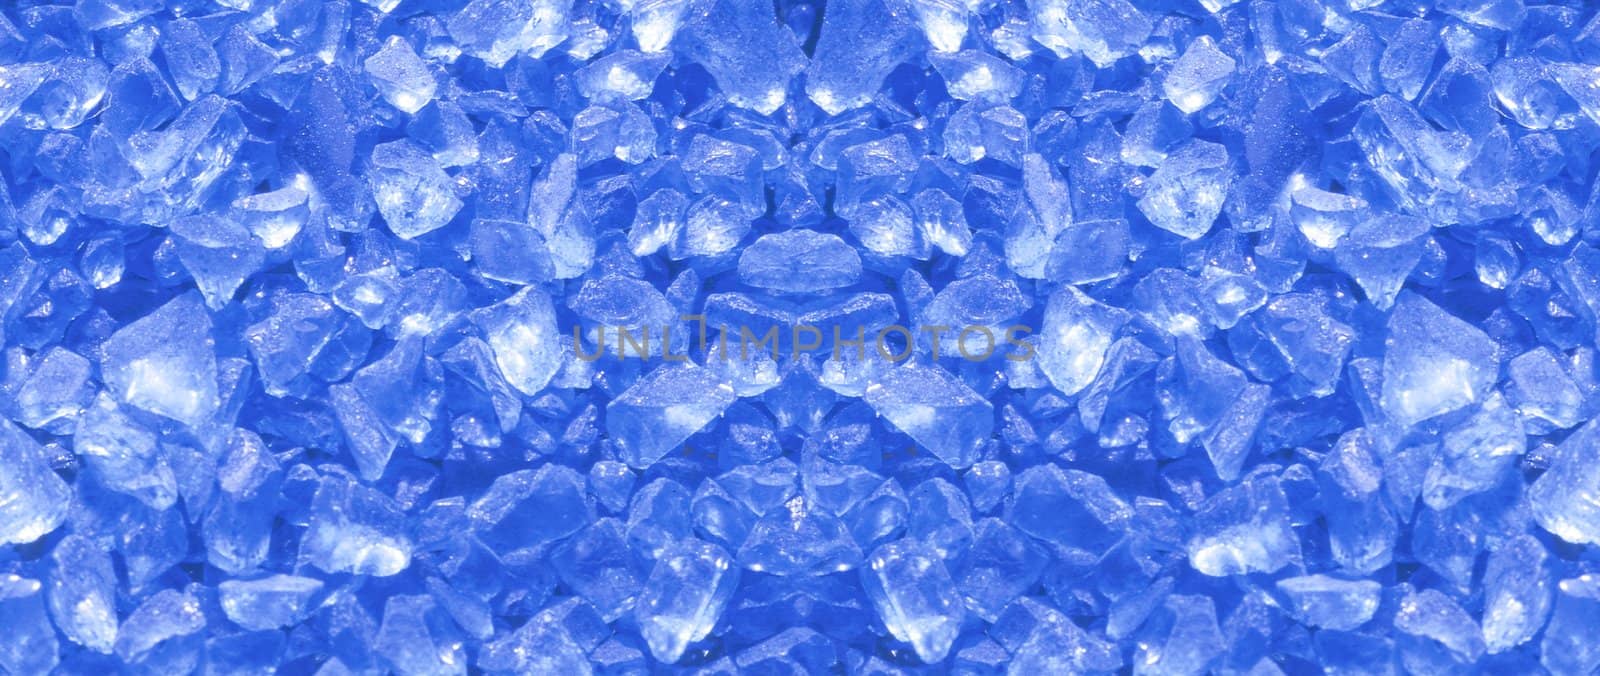 background with ice cubes in blue light by ozaiachin